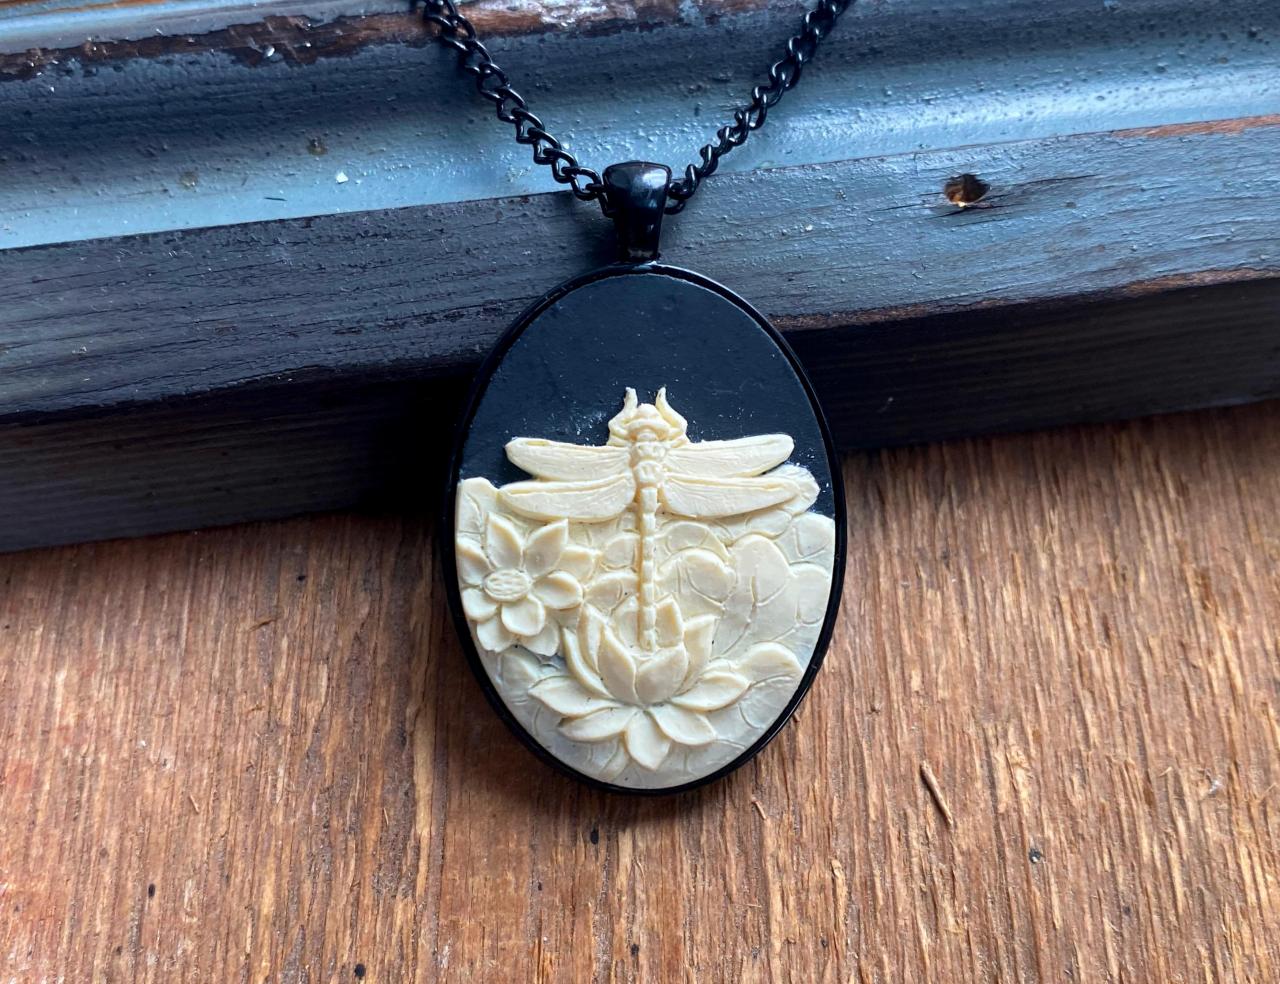 Dragonfly Cameo Necklace, Black Cameo Necklace, Nature Jewelry, Woodland Jewelry, Dragonfly Necklace, Gifts For Sister, Girlfriend Gifts